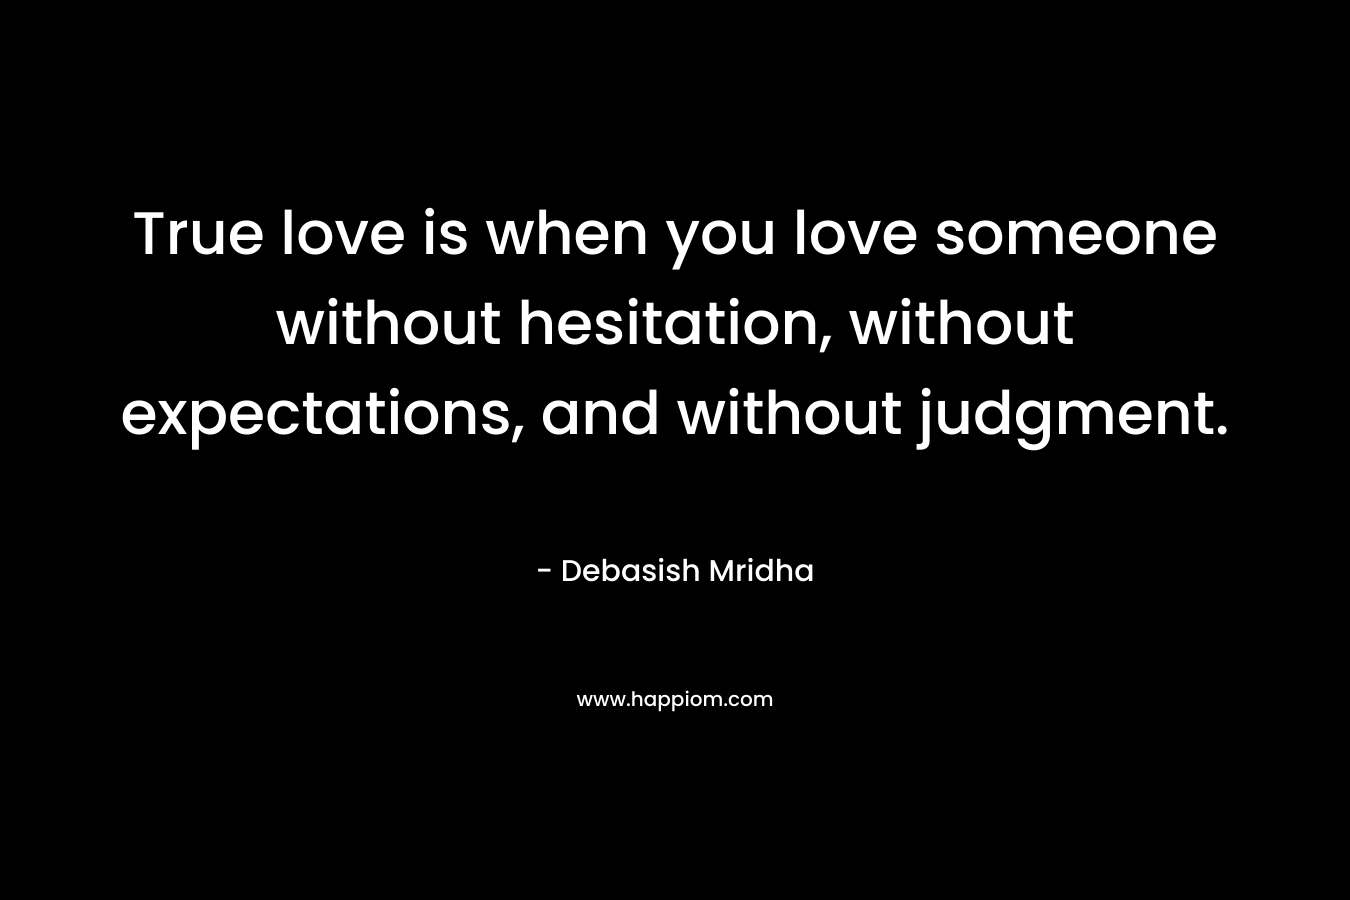 True love is when you love someone without hesitation, without expectations, and without judgment.